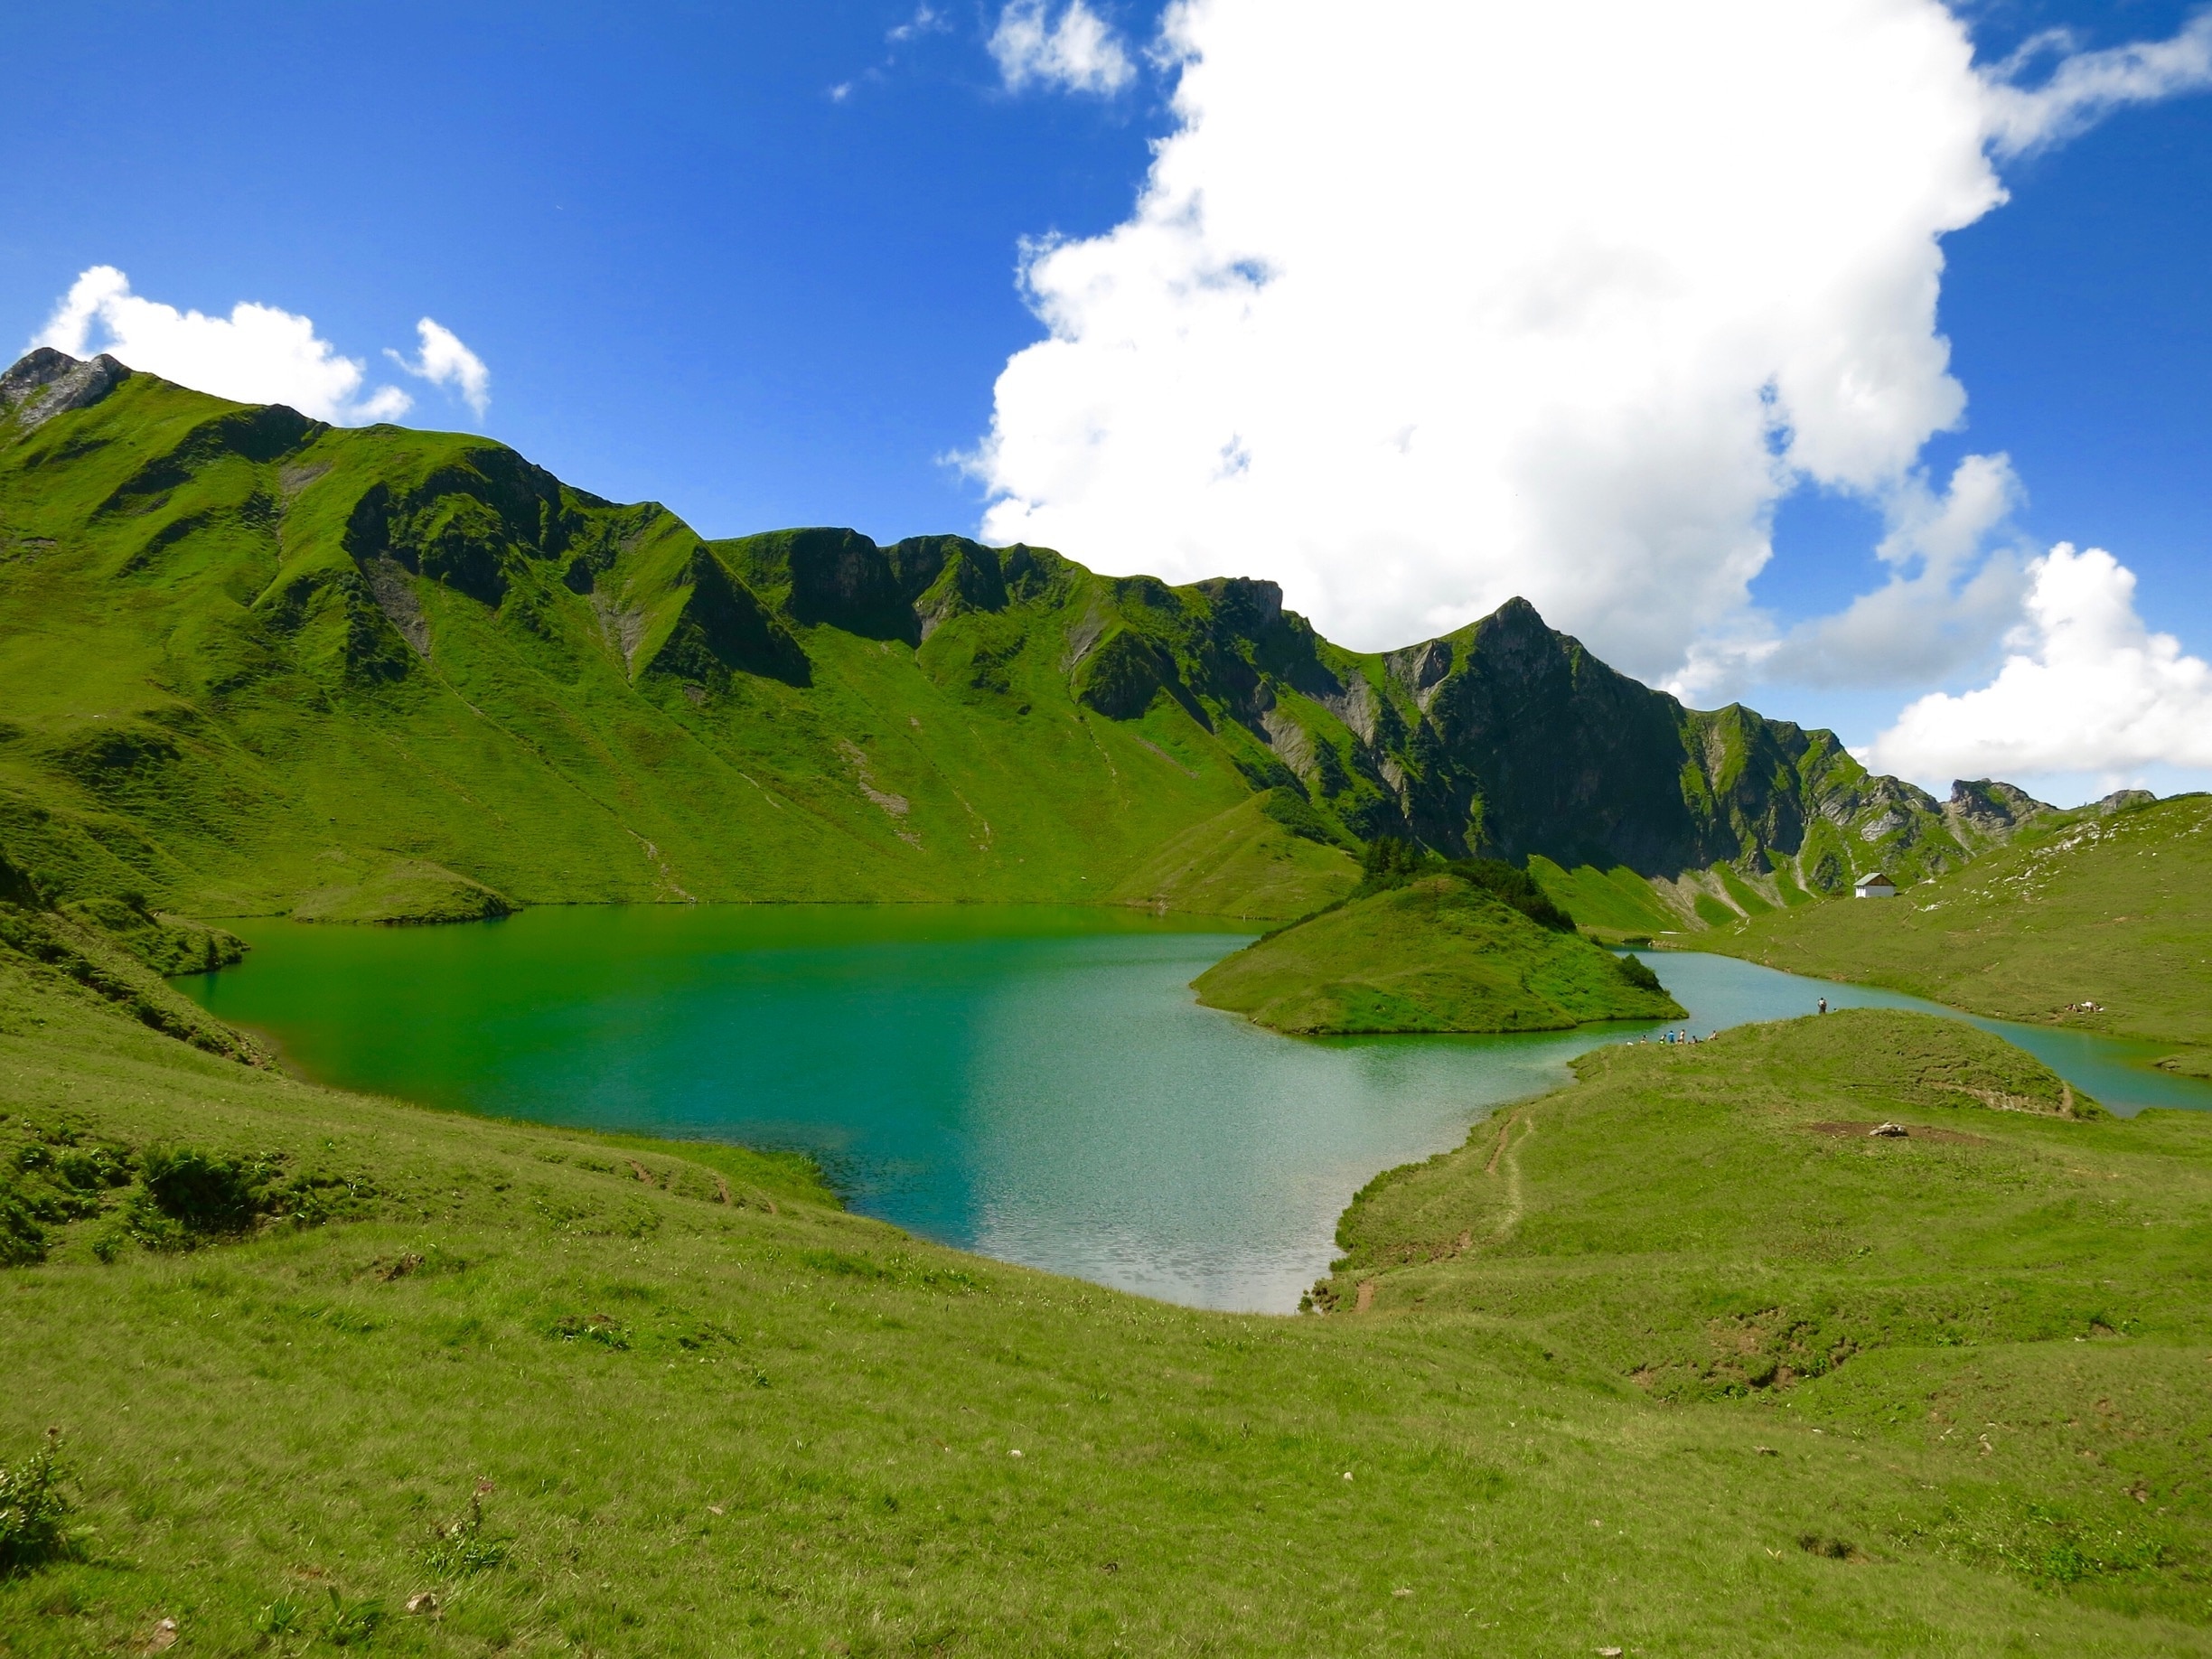 Did you know that you can find a slice of Scottish highlands in #Germany, to be more precise, in the Allgaeu region of the Bavarian Alps? 

Let me introduce you to the picturesque high alpine lake of Schrecksee with an island on 1813 m/5949 ft! It's a very popular destination especially in summer among hikers and cattle alike. From the saddle, you can cross the border to Austria and enjoy the breathtaking views over the mountain valley and the lake in the middle of the rolling hills!  #hiking #mountains #outdoors #nature 